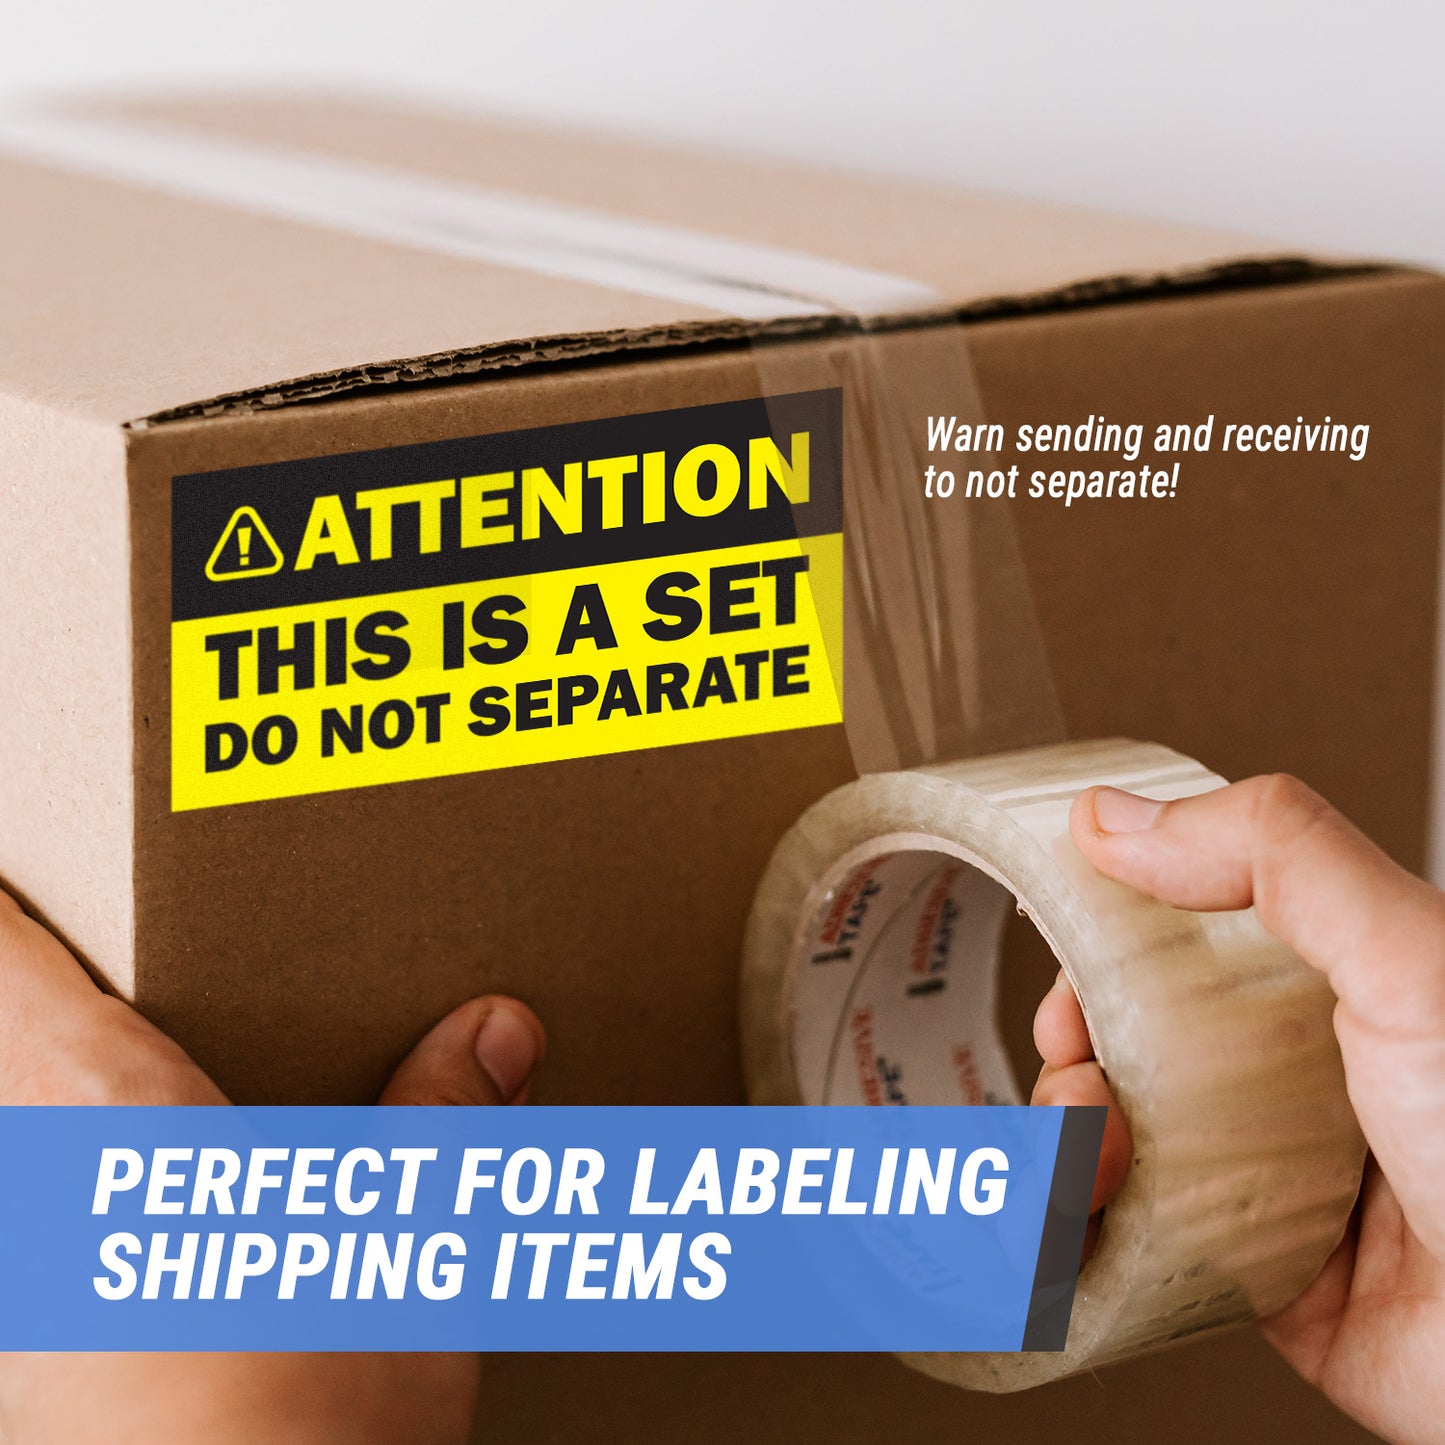 6 x 3 inch | Shipping & Handling: Attention, This is a Set, Do Not Separate Stickers